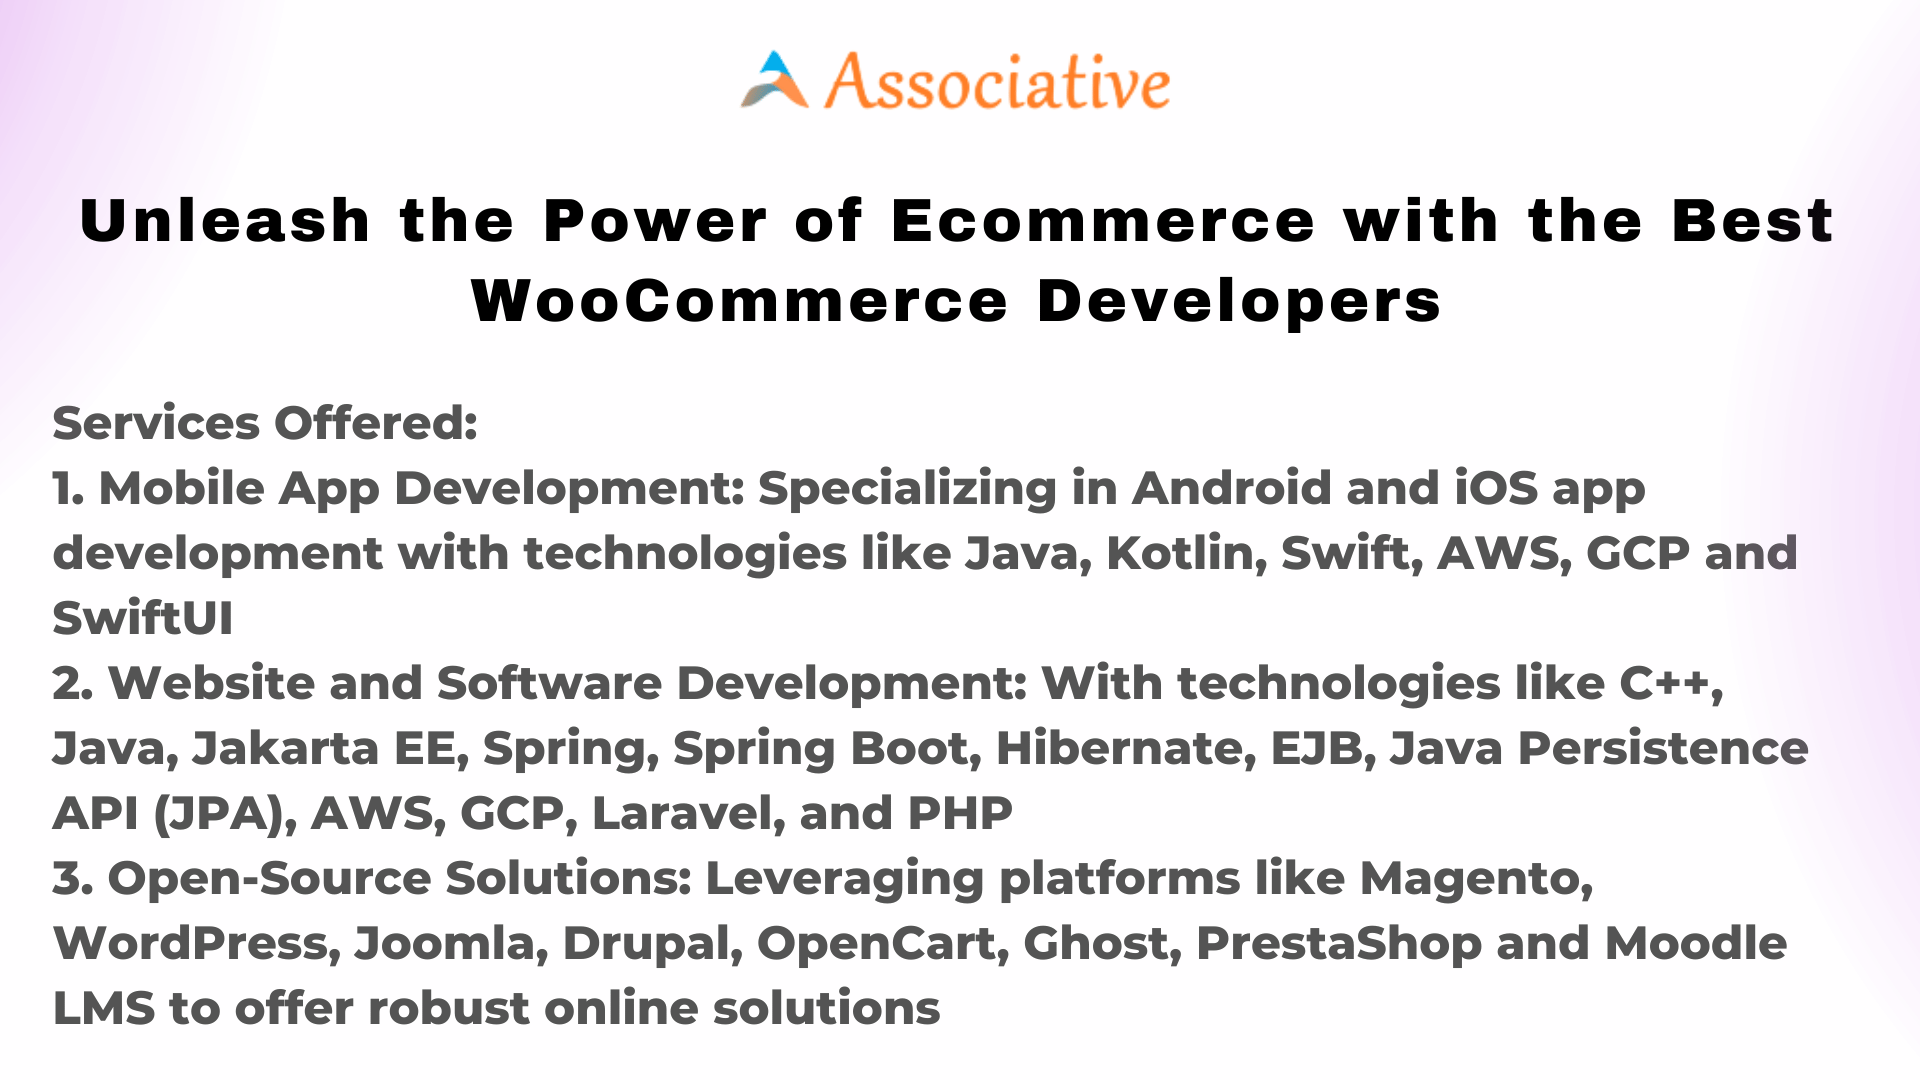 Unleash the Power of Ecommerce with the Best WooCommerce Developers